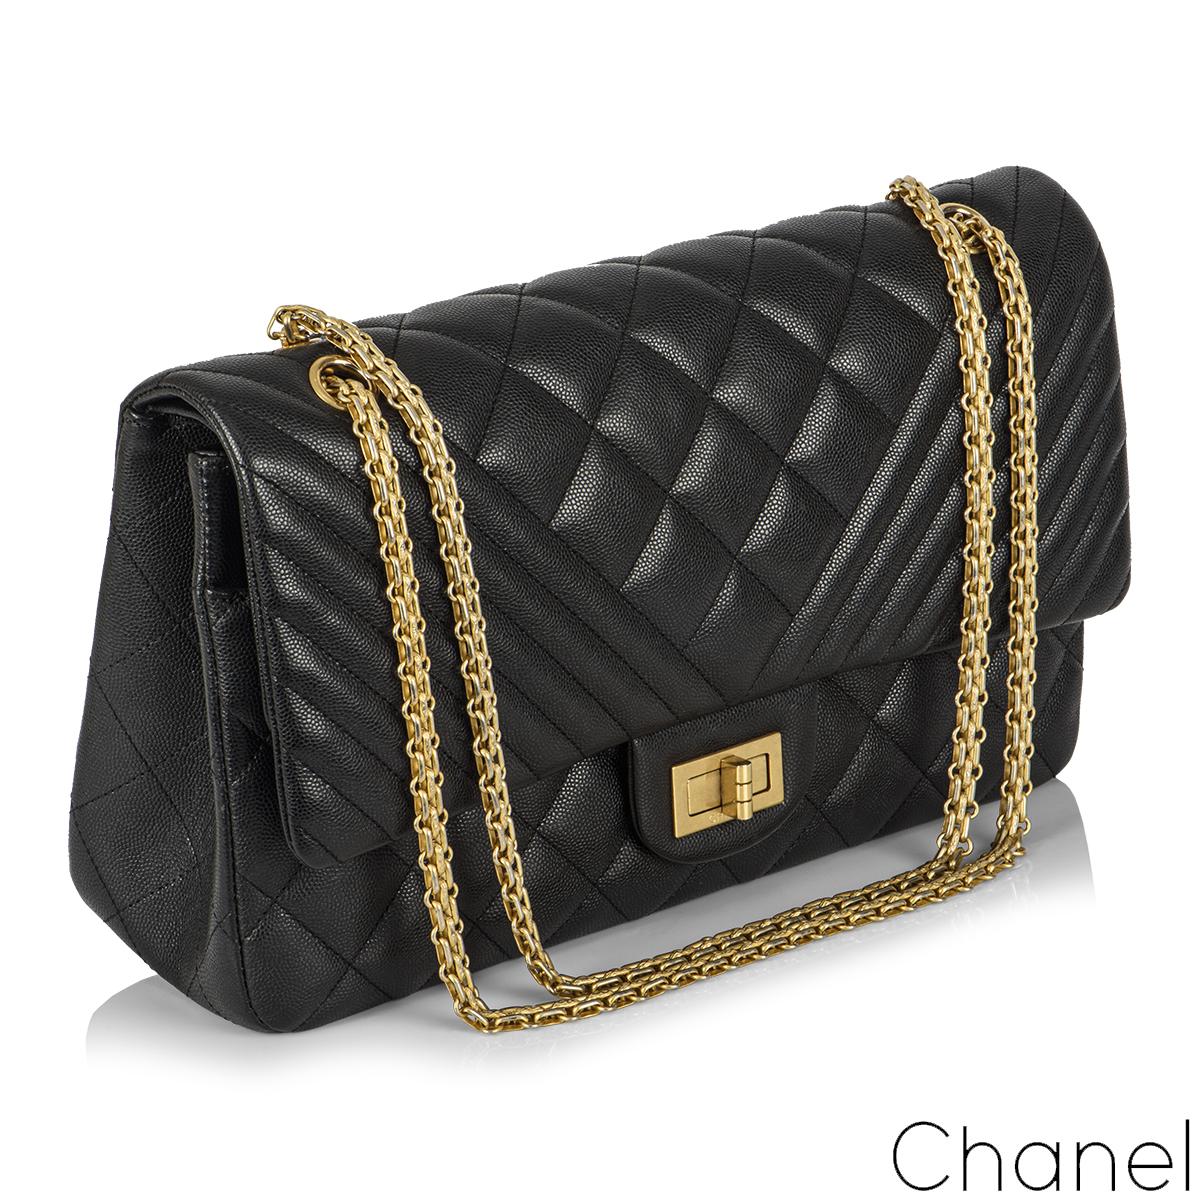 A Chic Chanel 2.55 Reissue Jumbo Double Flap Handbag. The exterior of this reissue 2.55 is crafted in classic black caviar leather with aged gold tone hardware. This reissue bag features both signature diamond and chevron style stitching, which is